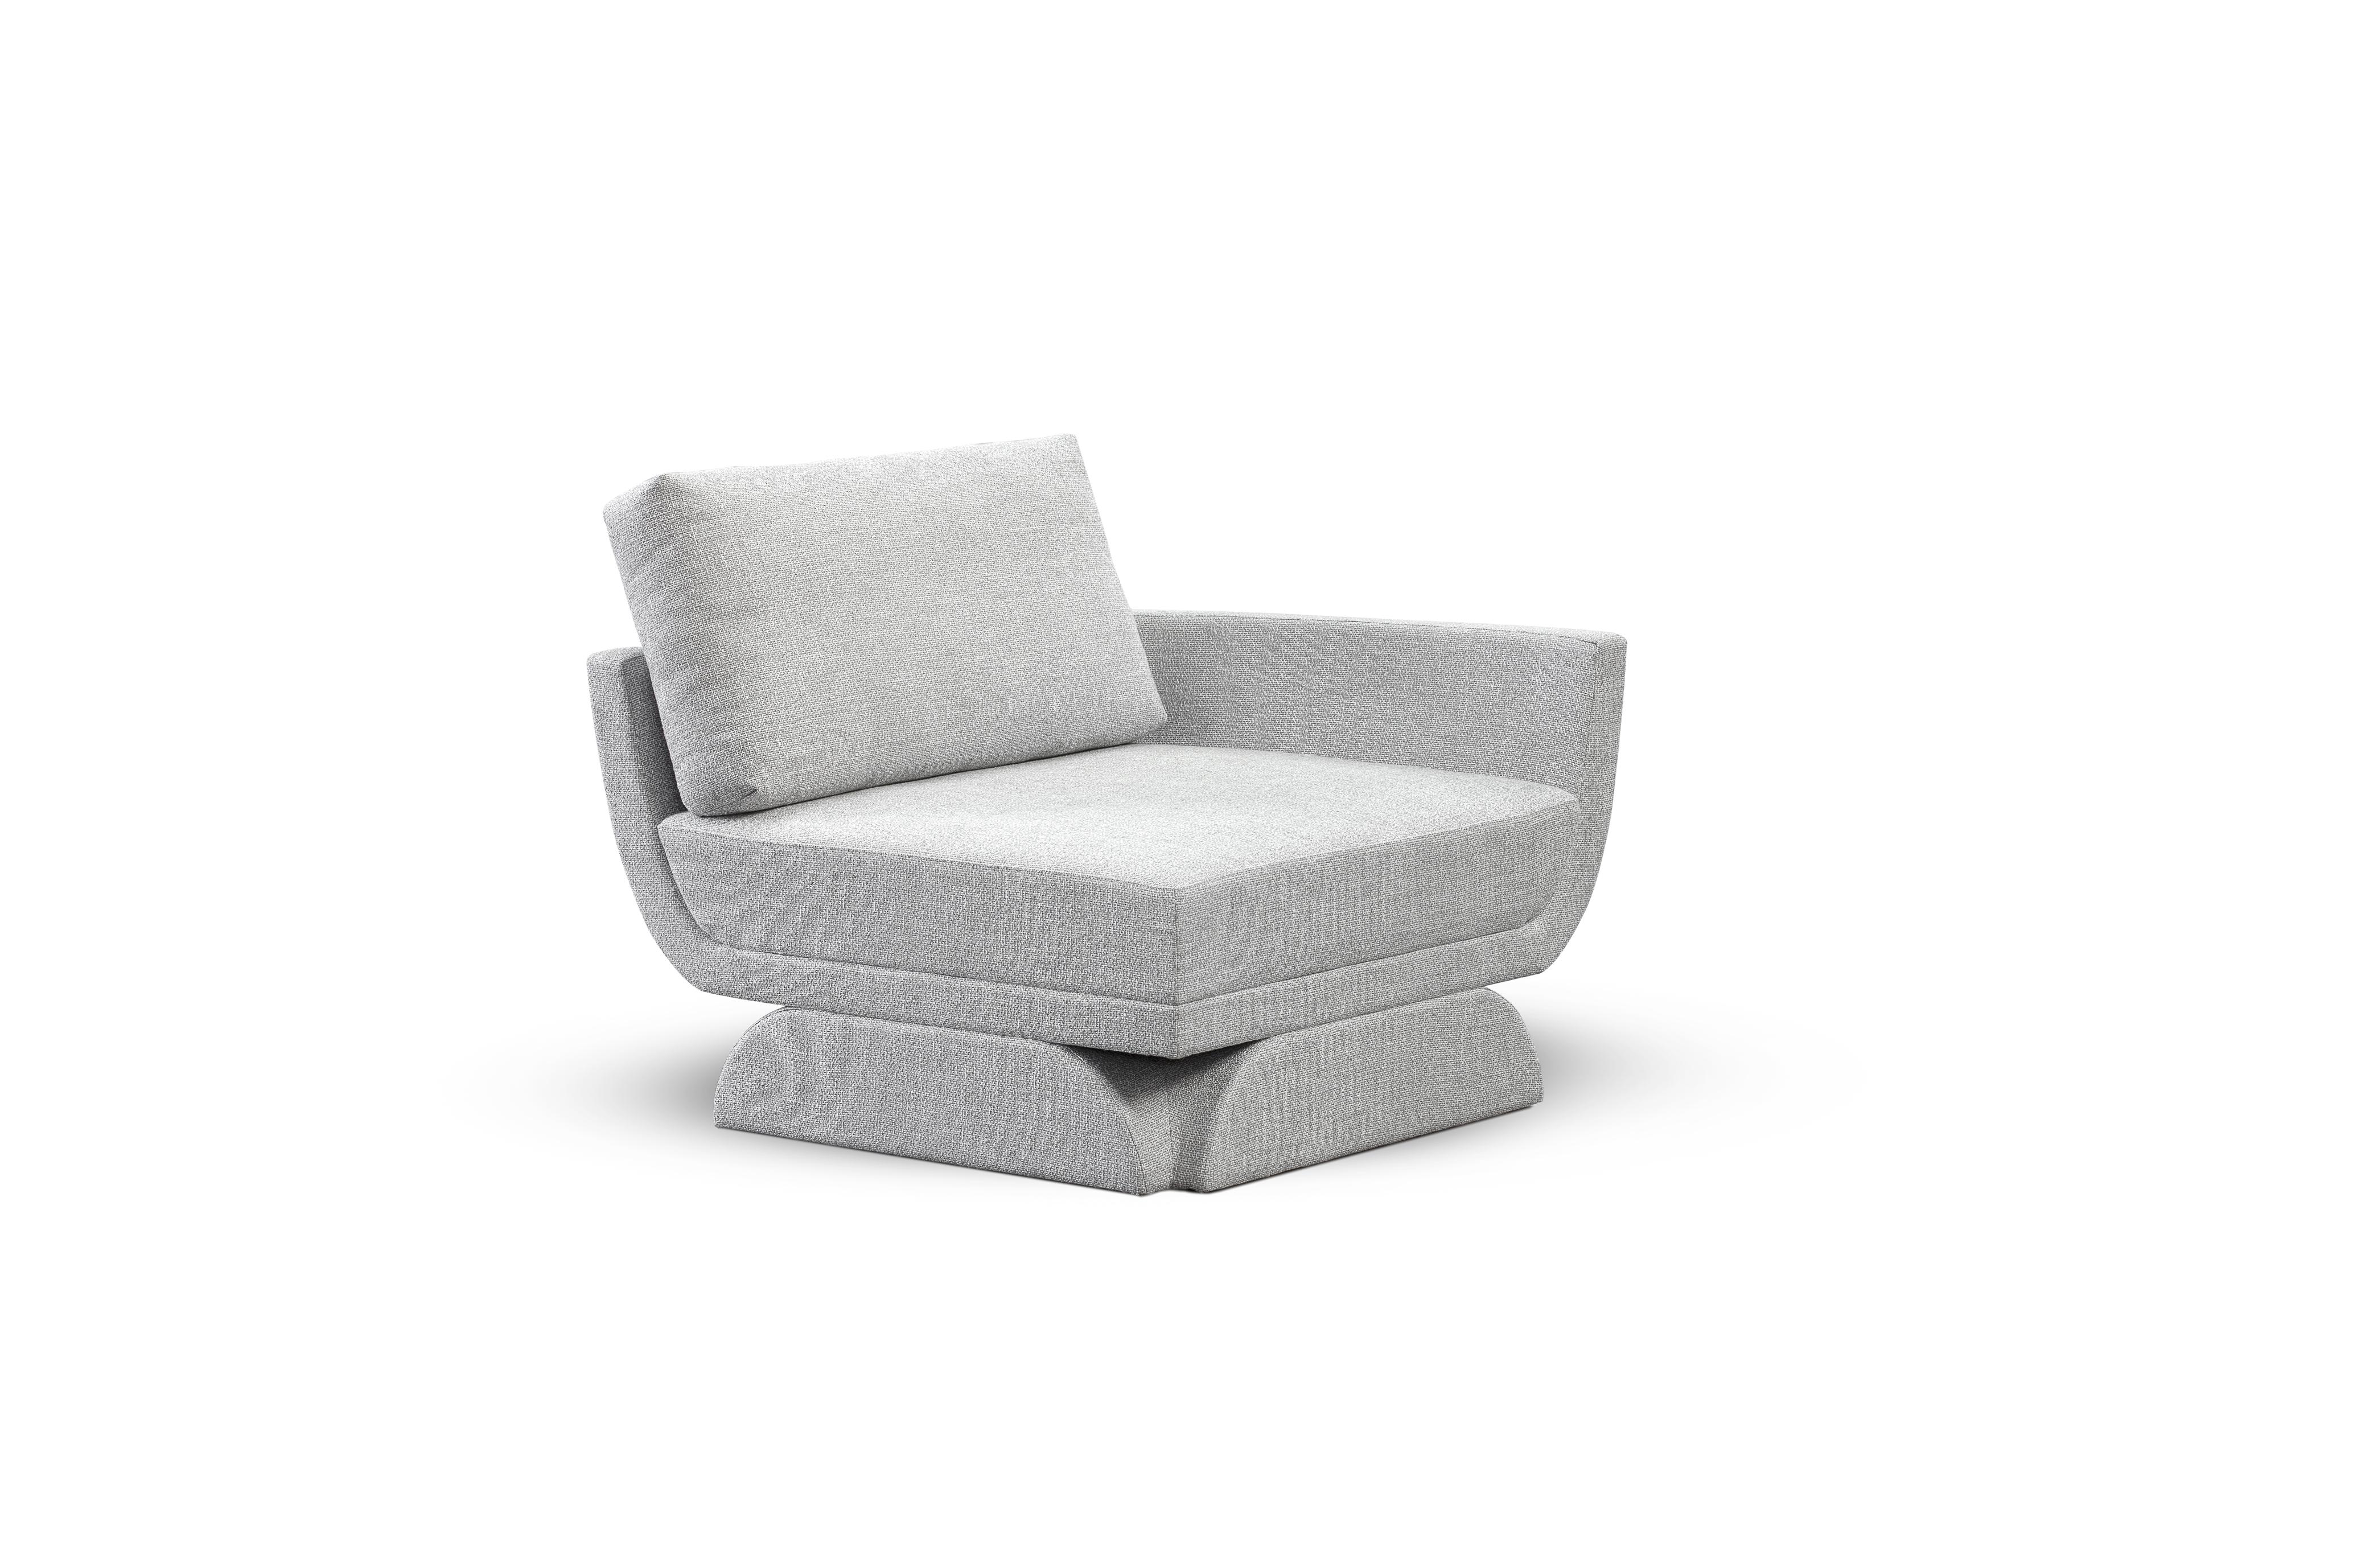 Oscar Corner Modular Sofa by DUISTT 
Dimensions: W 105 x D 105 x H 84 cm
Materials: Duistt Fabric

Inspired by the curved lines poetry of Oscar Niemeyer’s architecture, OSCAR modular sofa allures for its sensual and free-flowing curves. Like